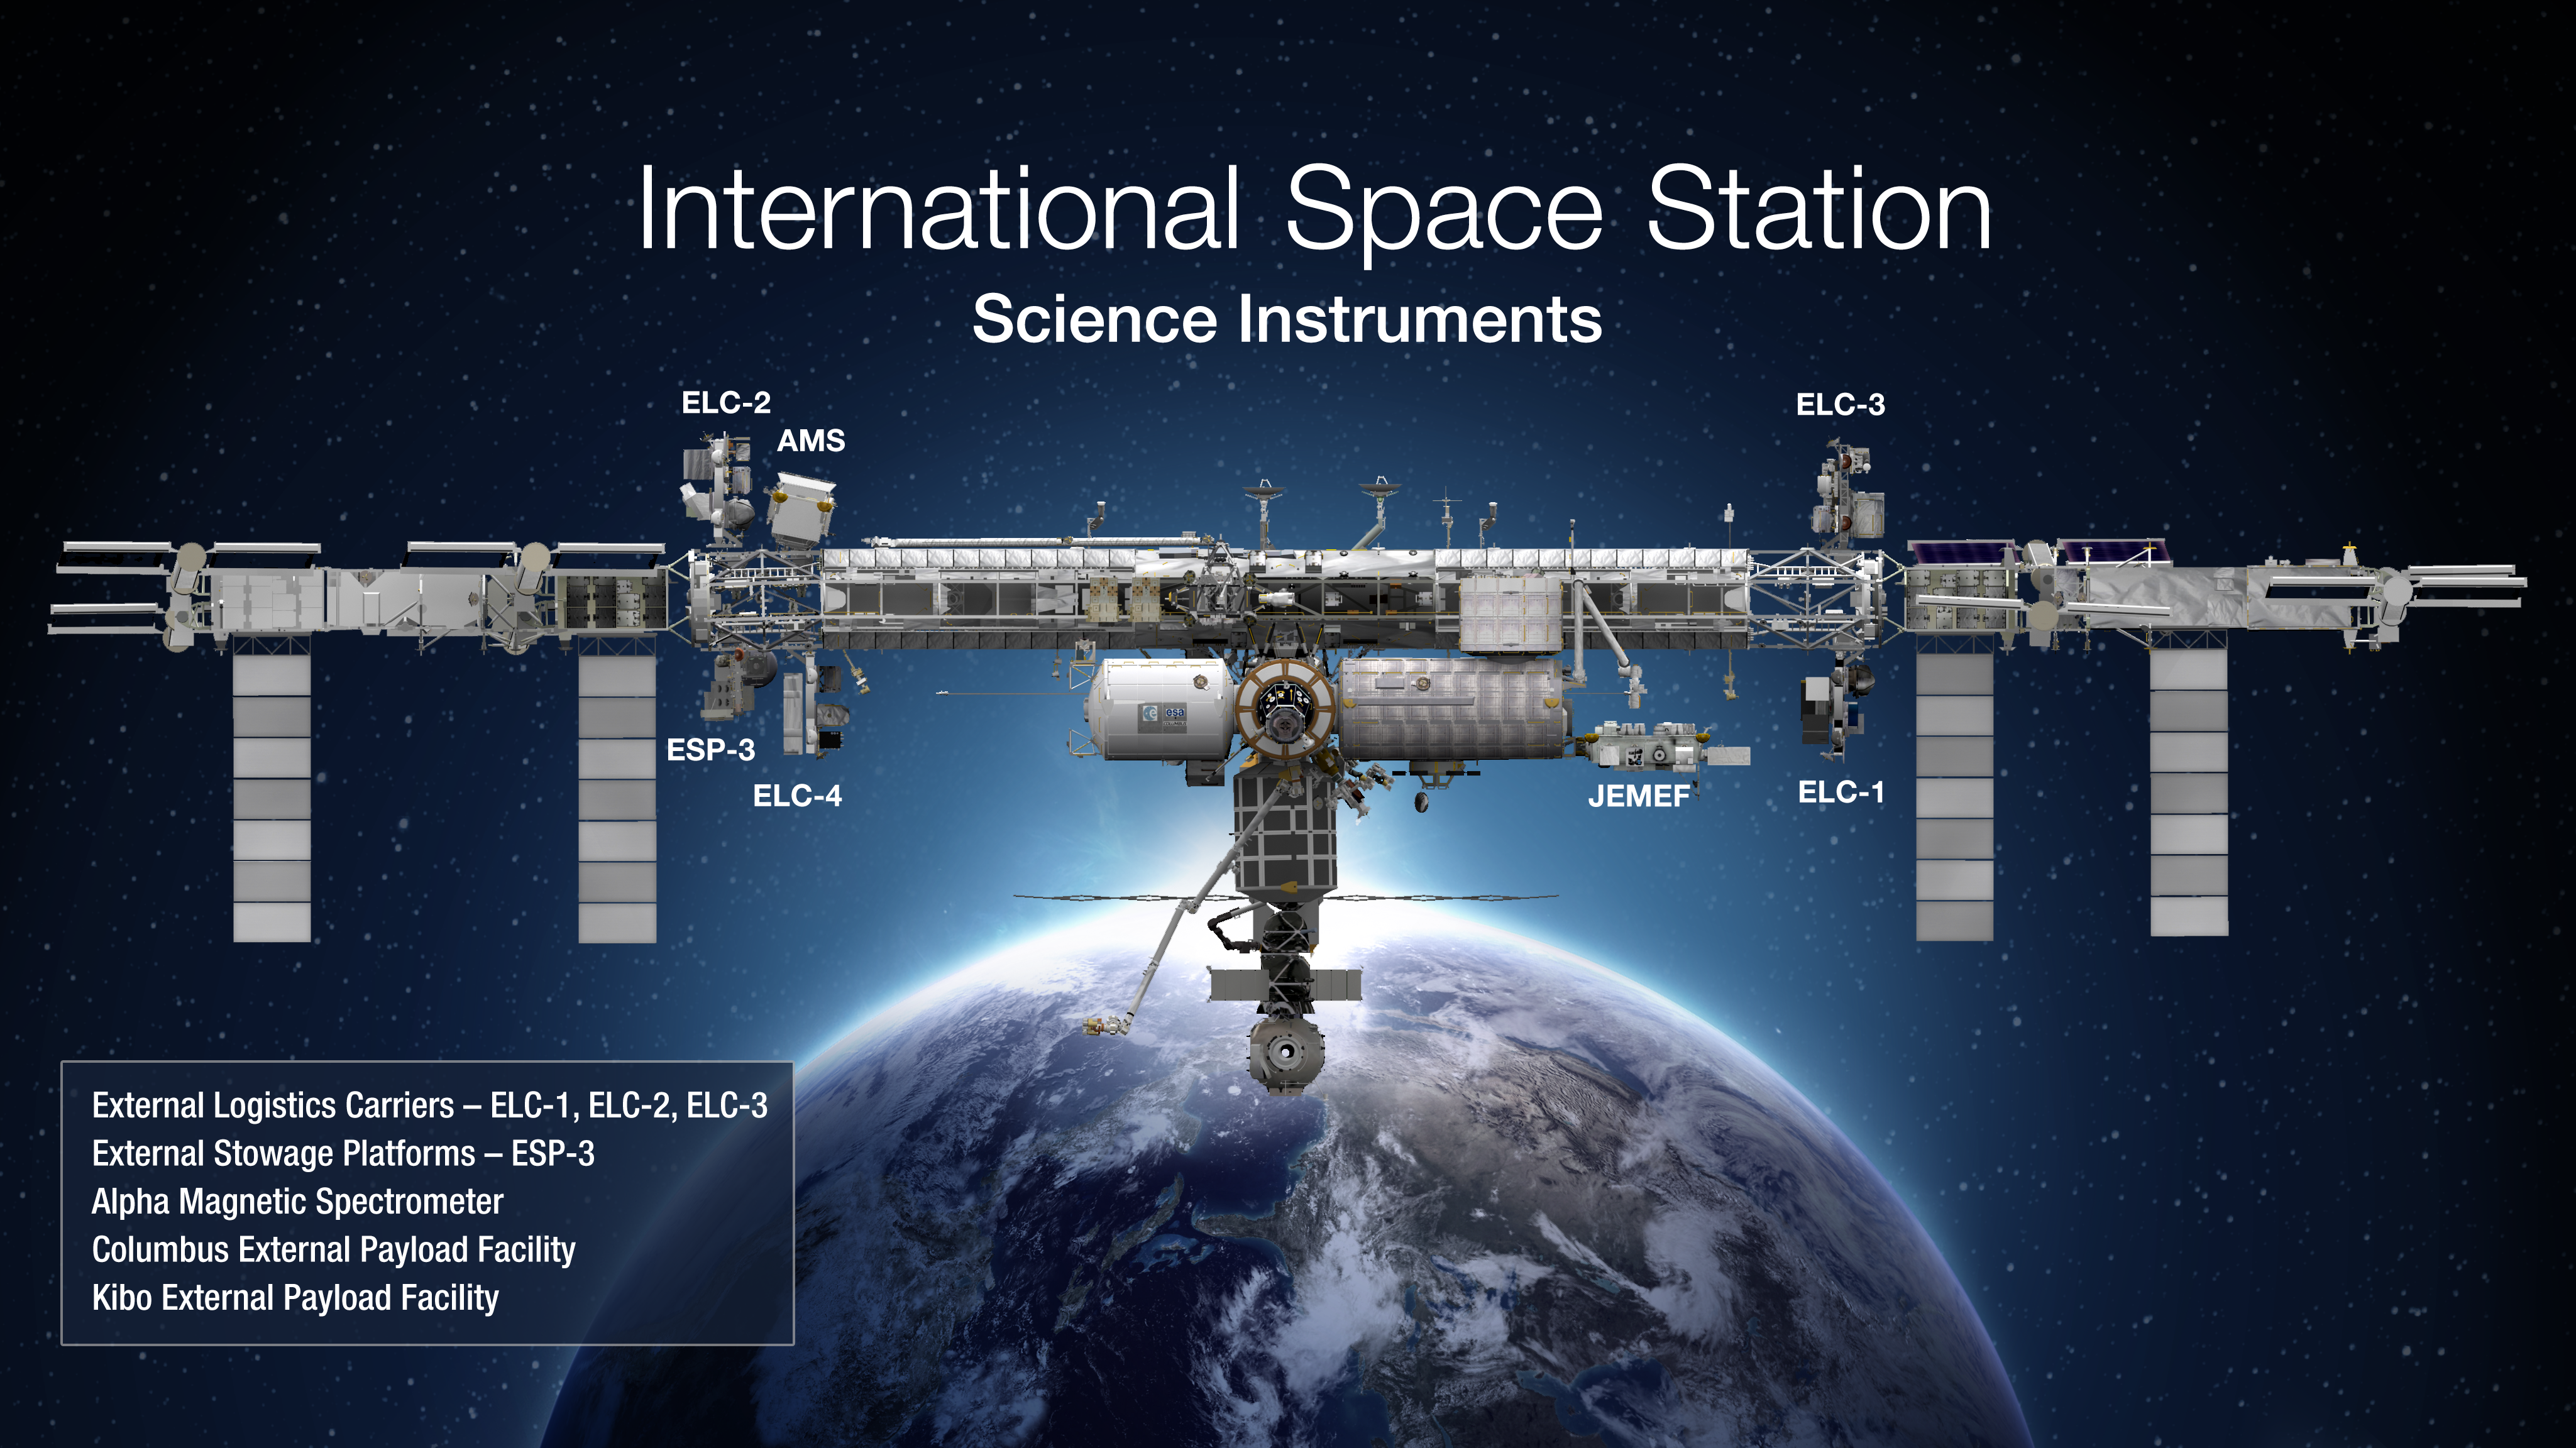 SVS - NASA Science Facilities on the International Space Station